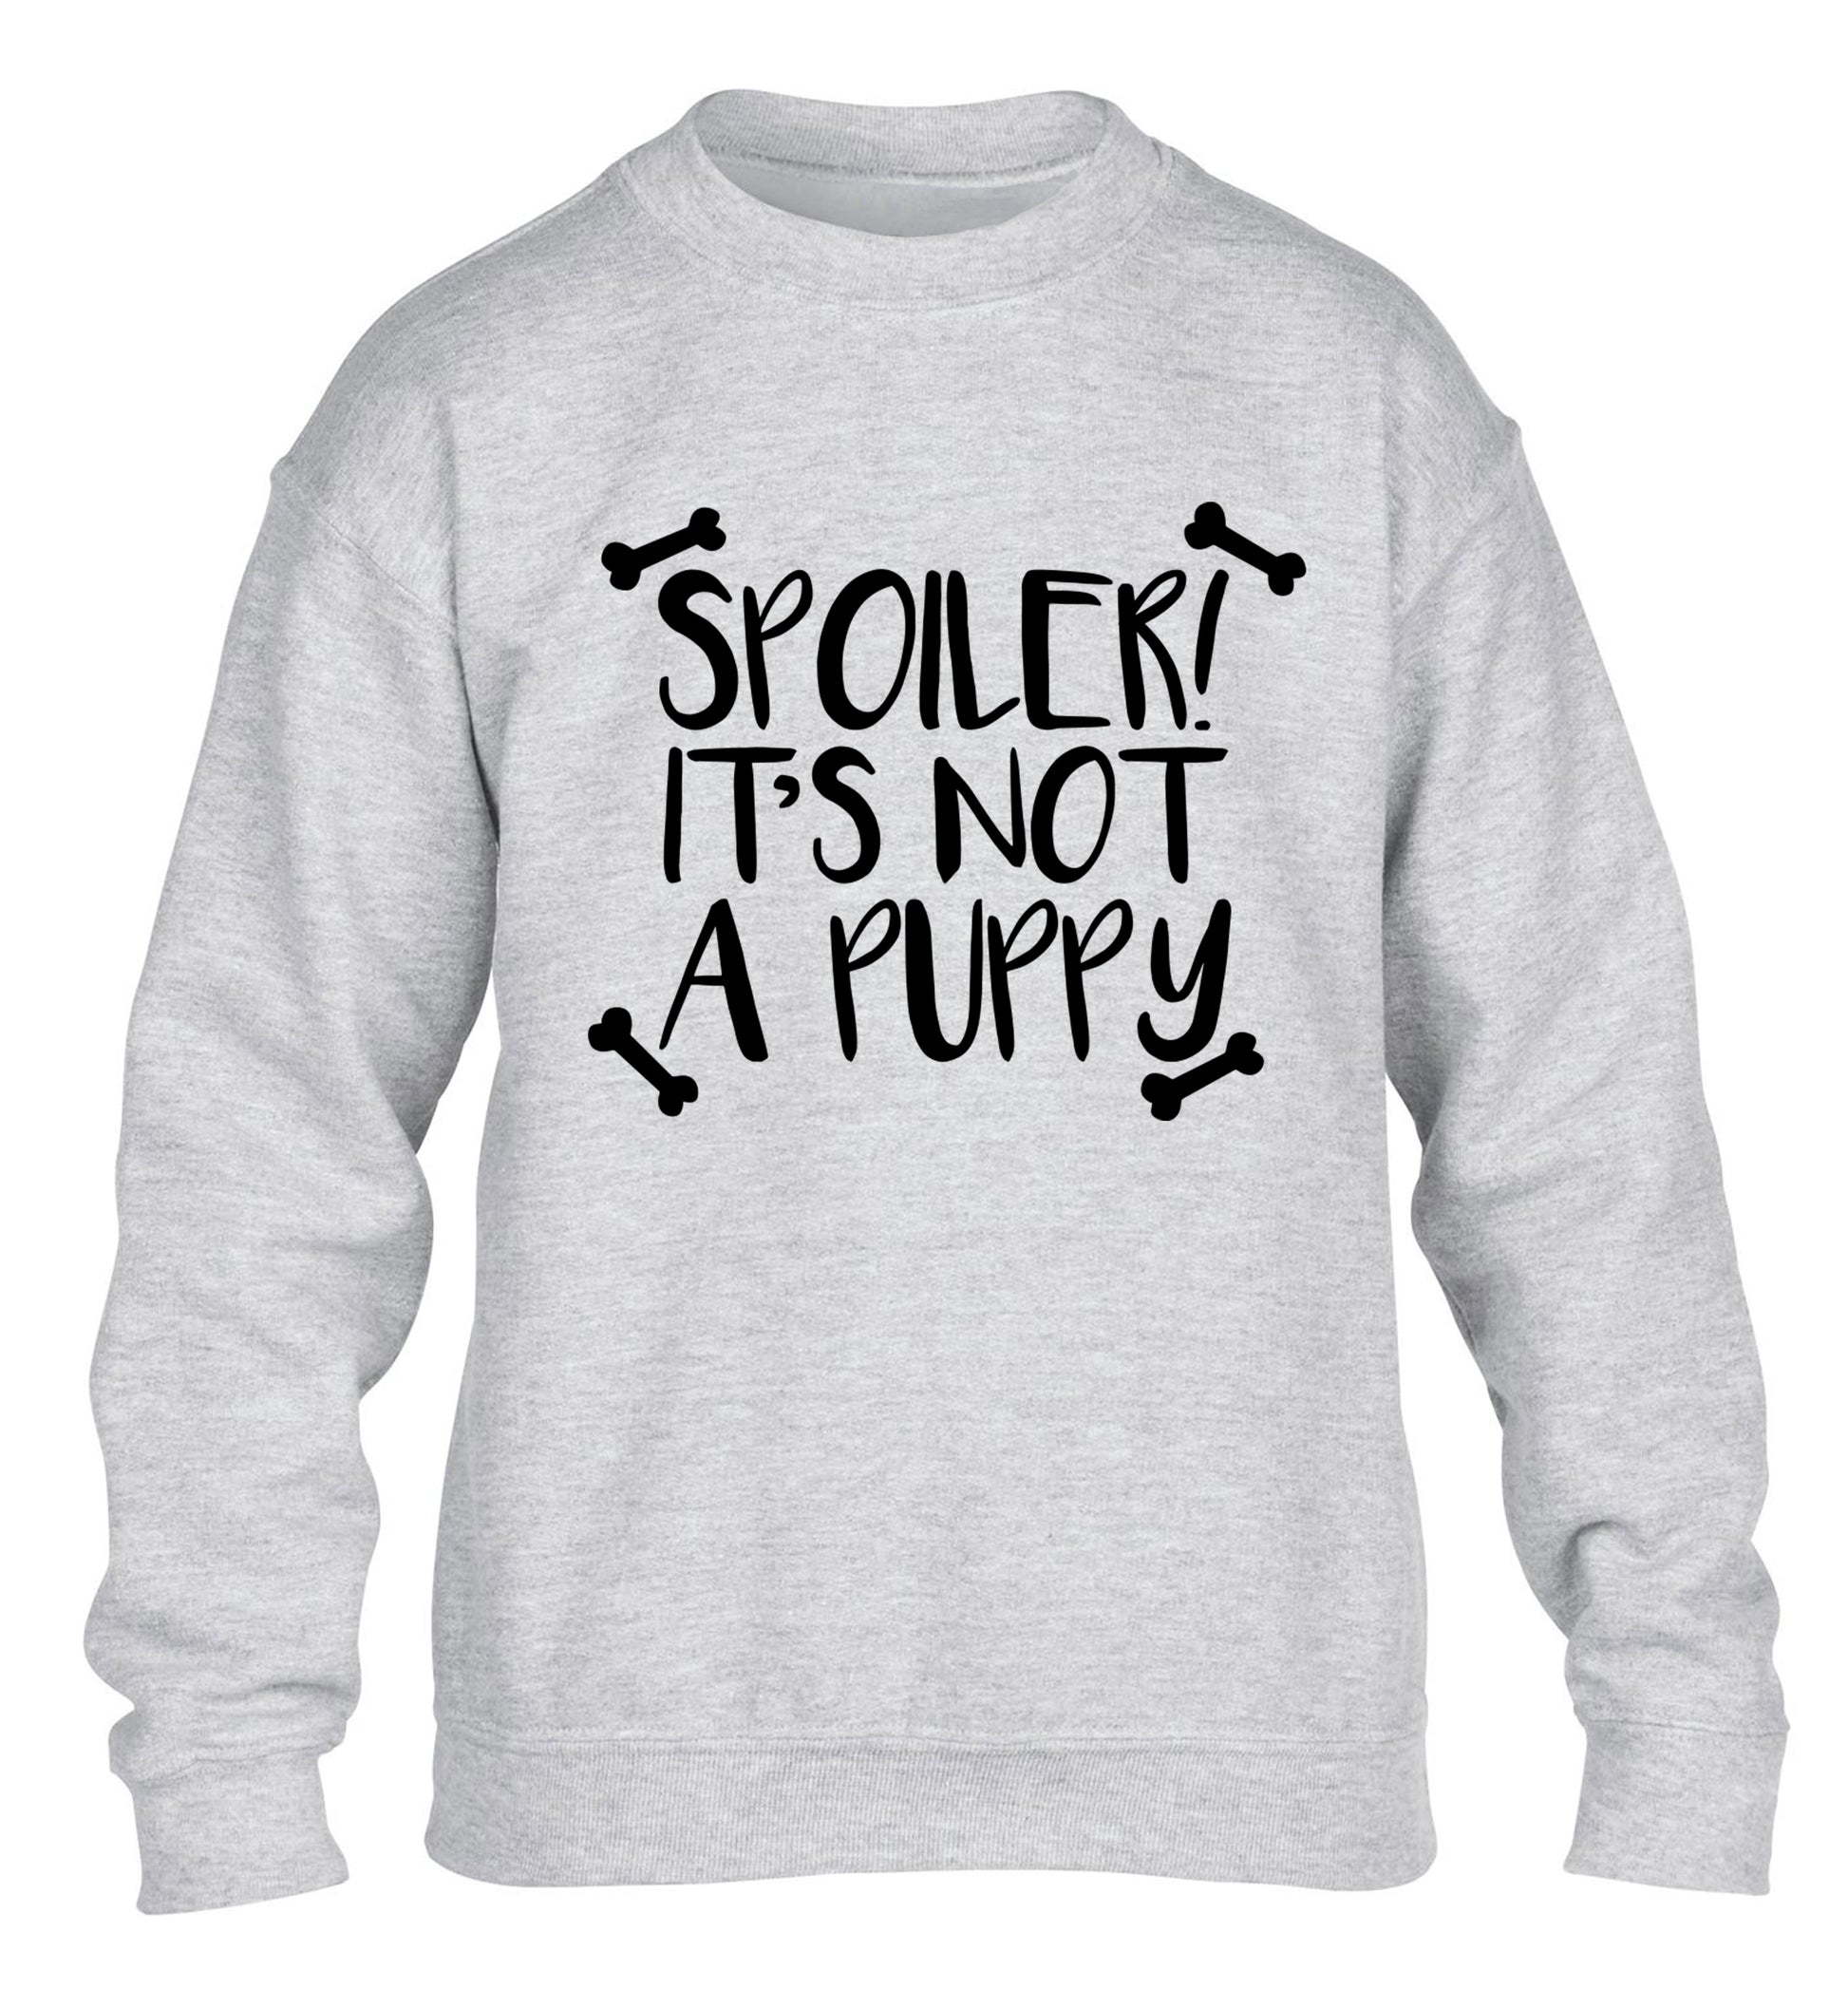 Spoiler it's not a puppy children's grey sweater 12-13 Years